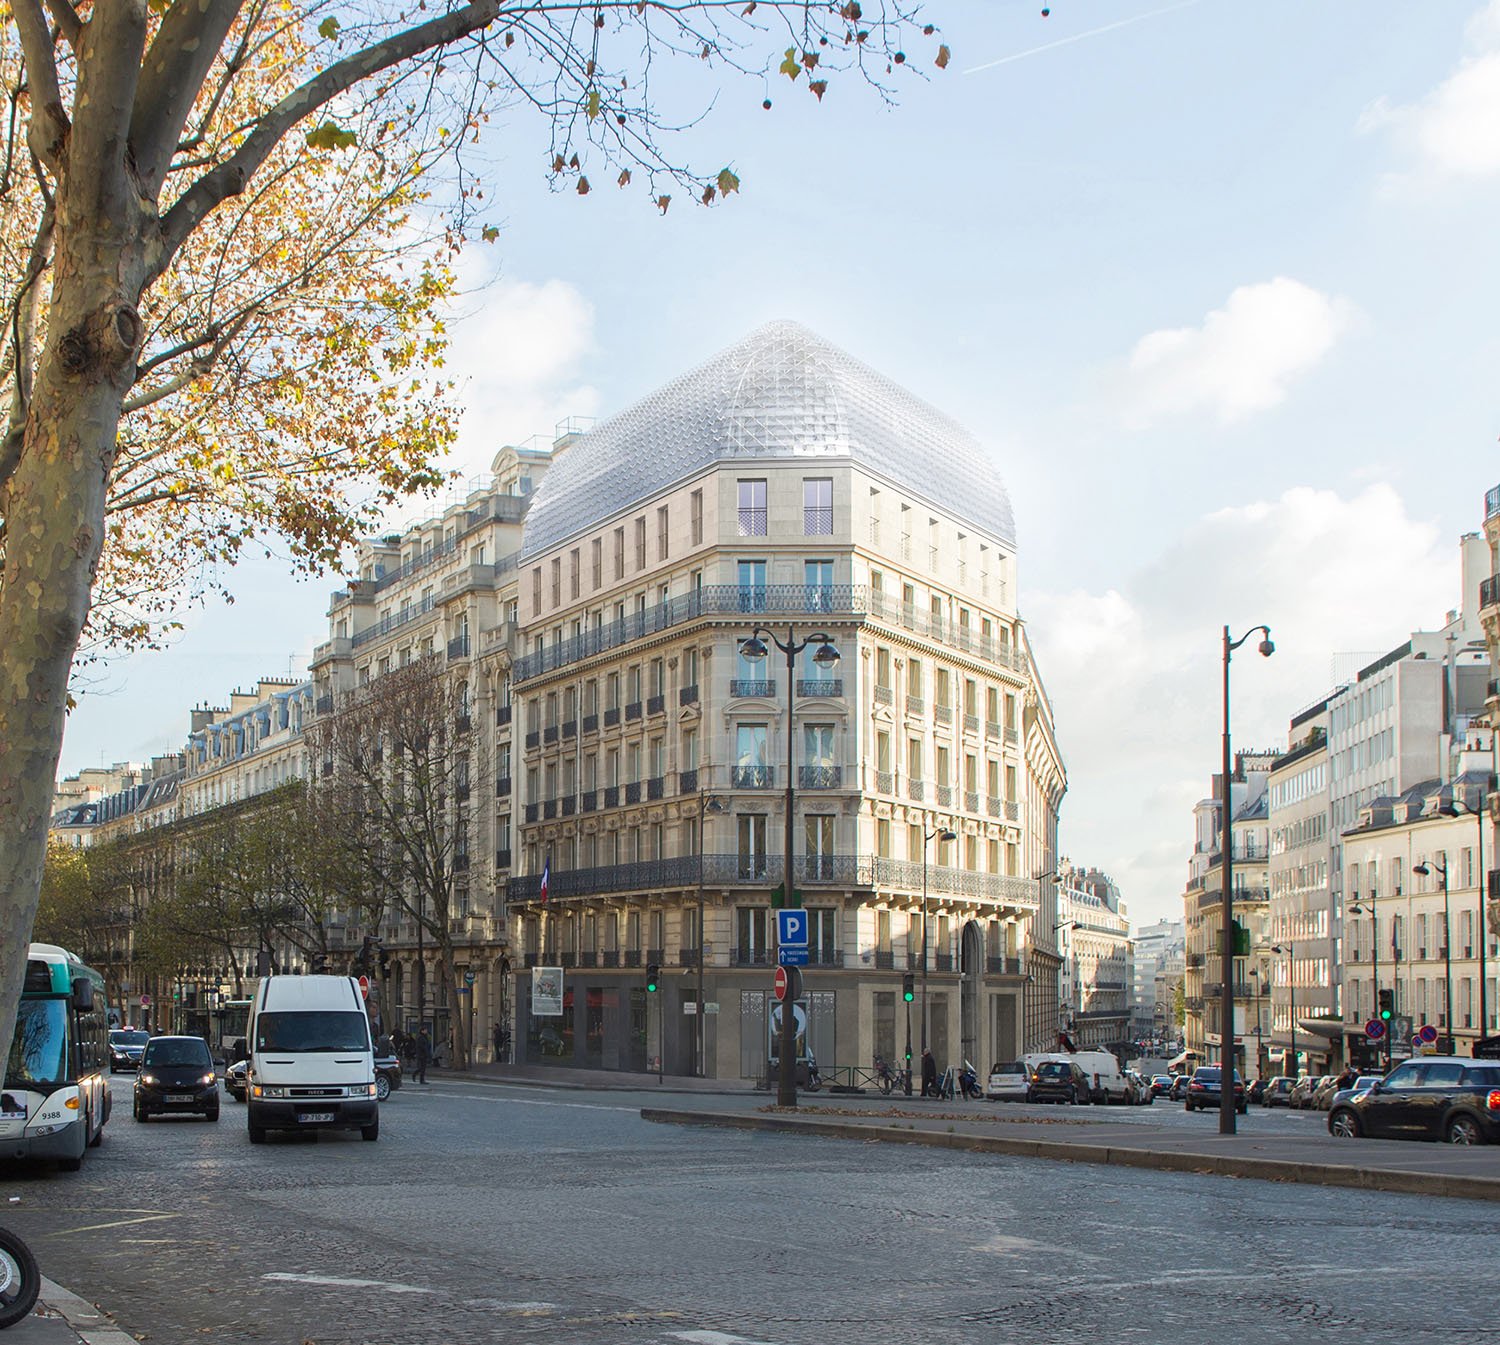 175 Haussmann after its restructuring, from the front view. | ©PCA-STREAM